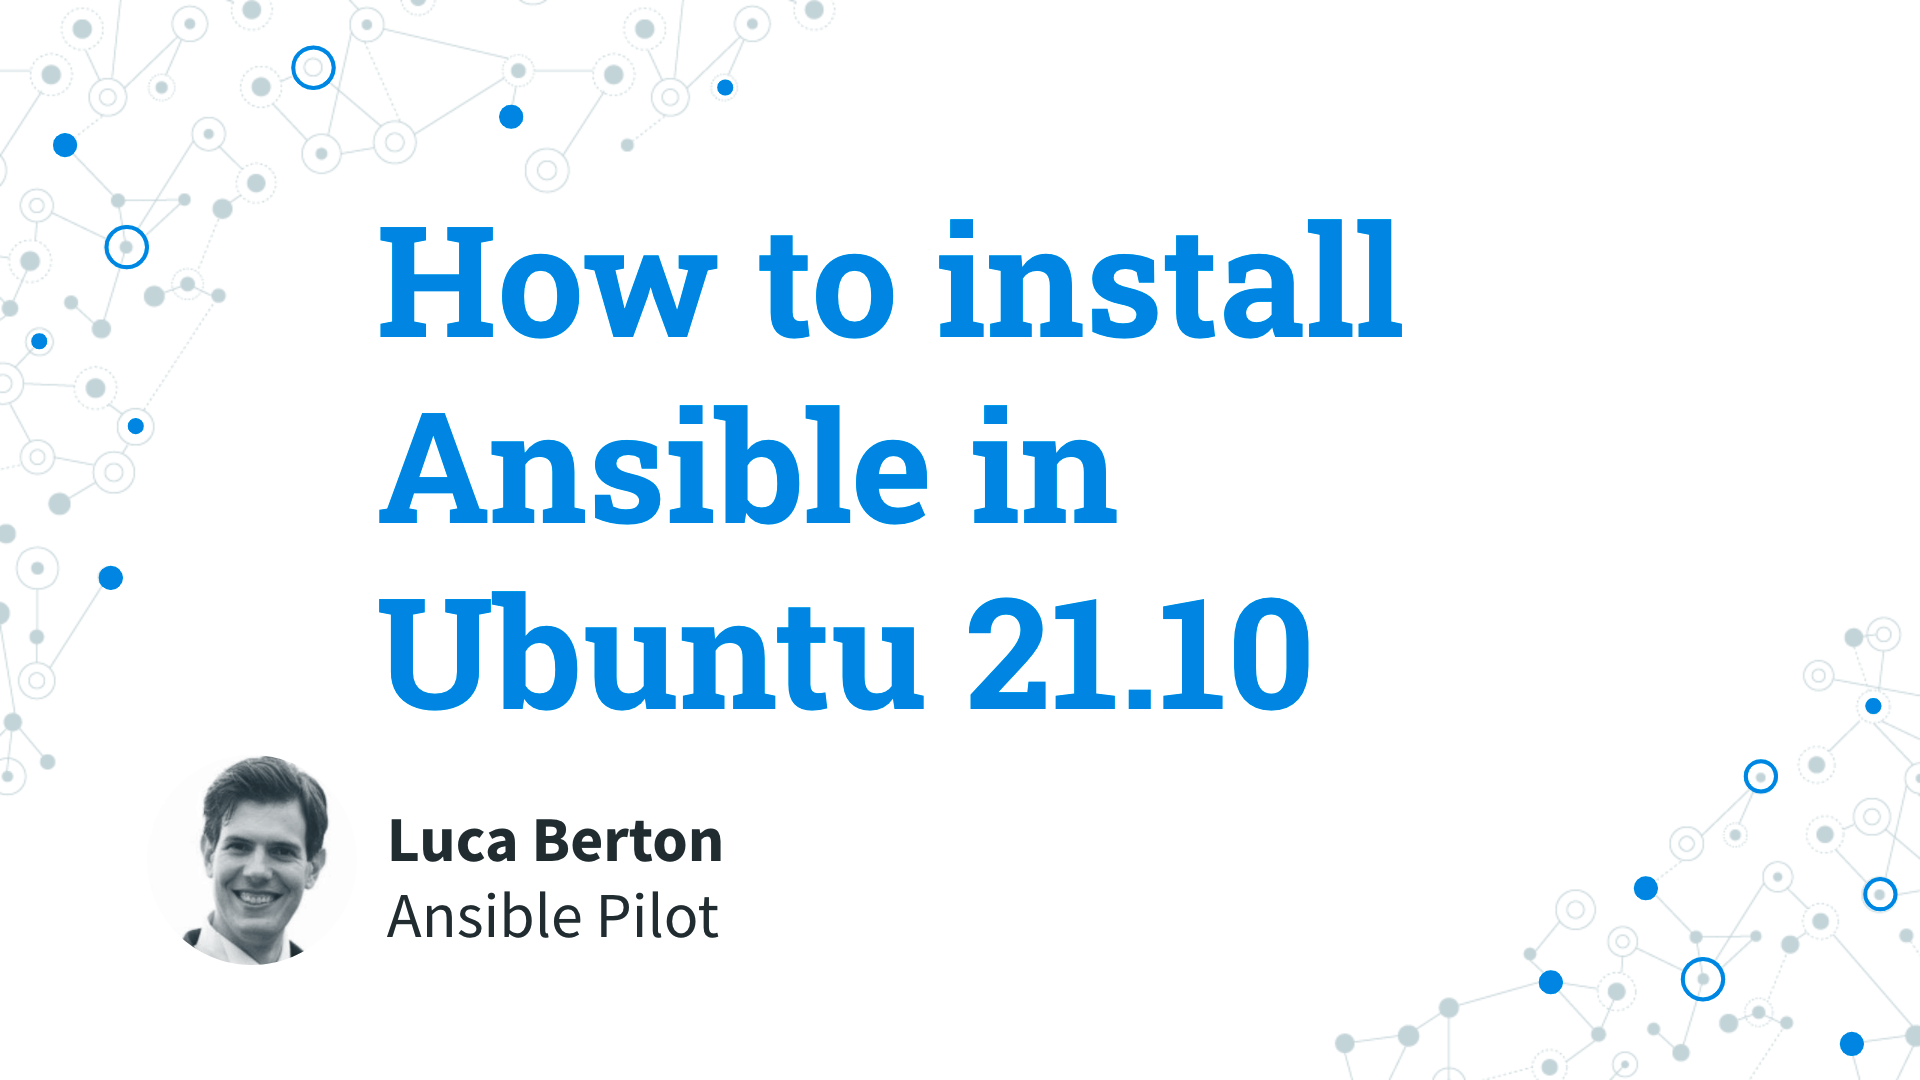 How to install Ansible in Ubuntu 21.10 - Ansible install